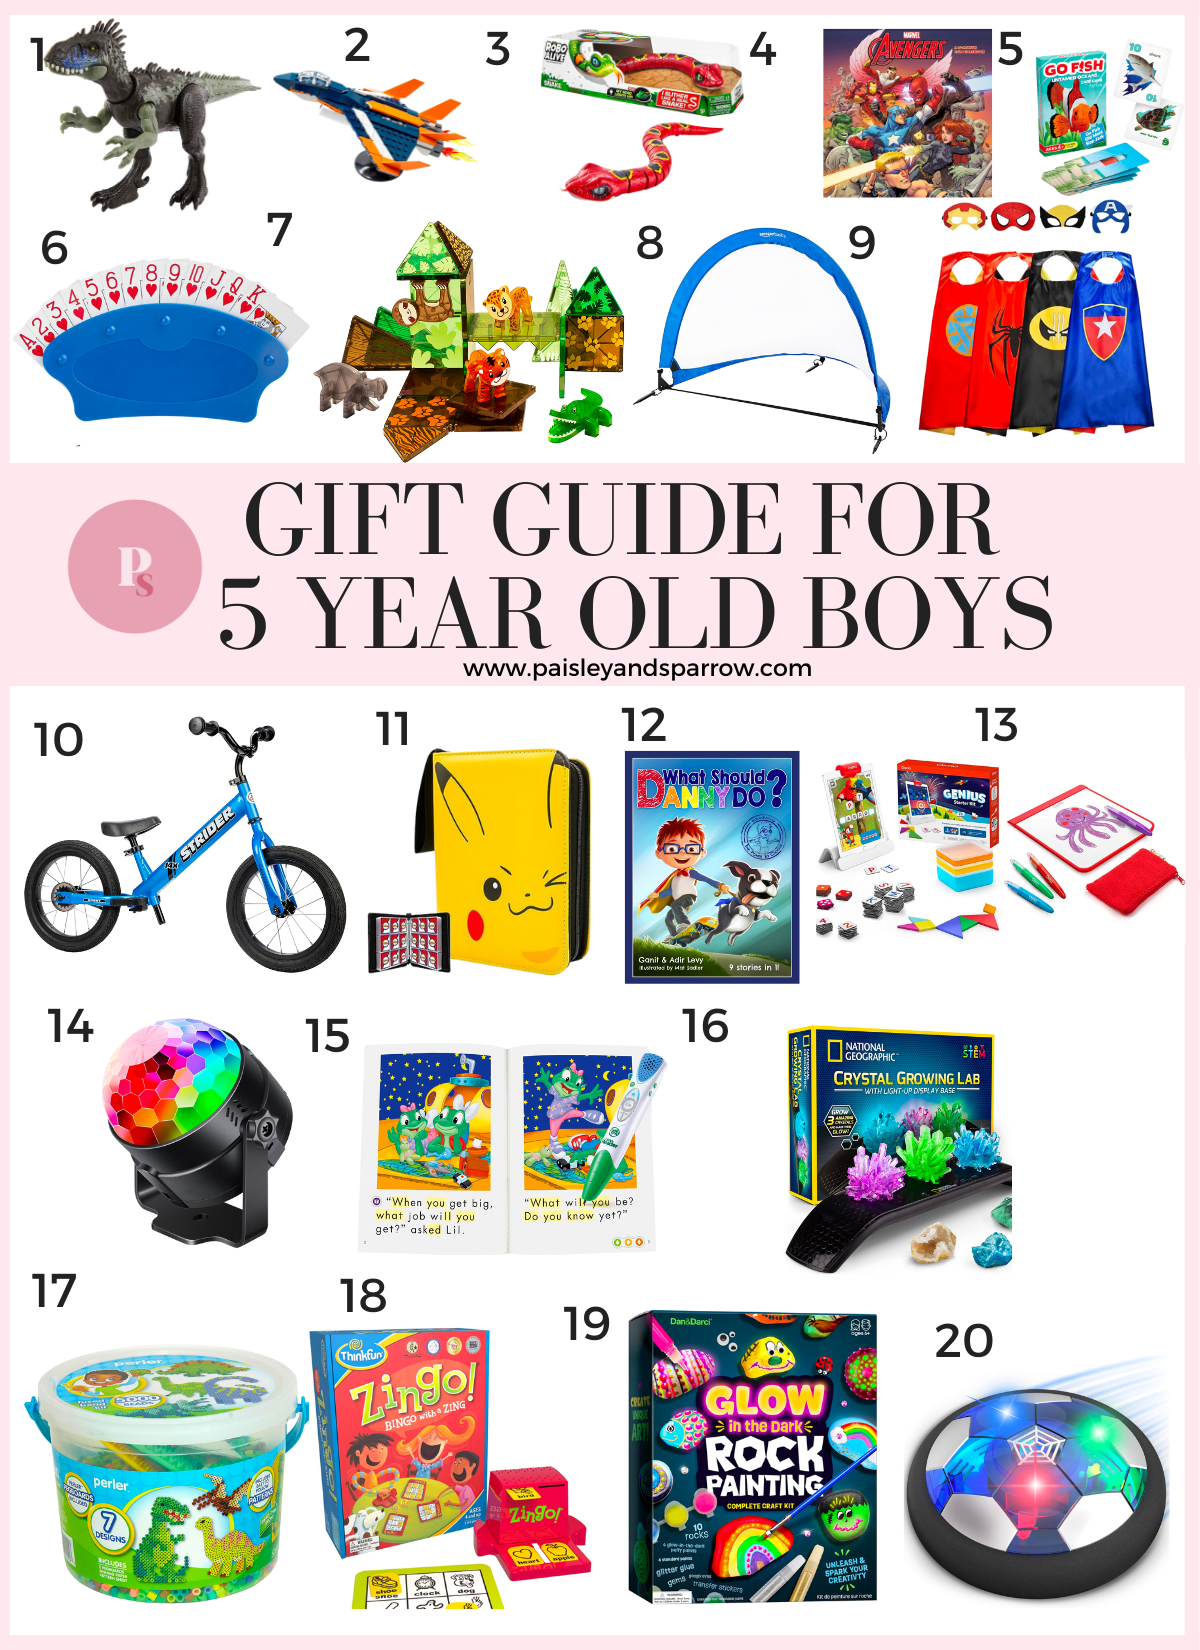 15 Gift Ideas for Two Year Old Boys - FamilyEducation